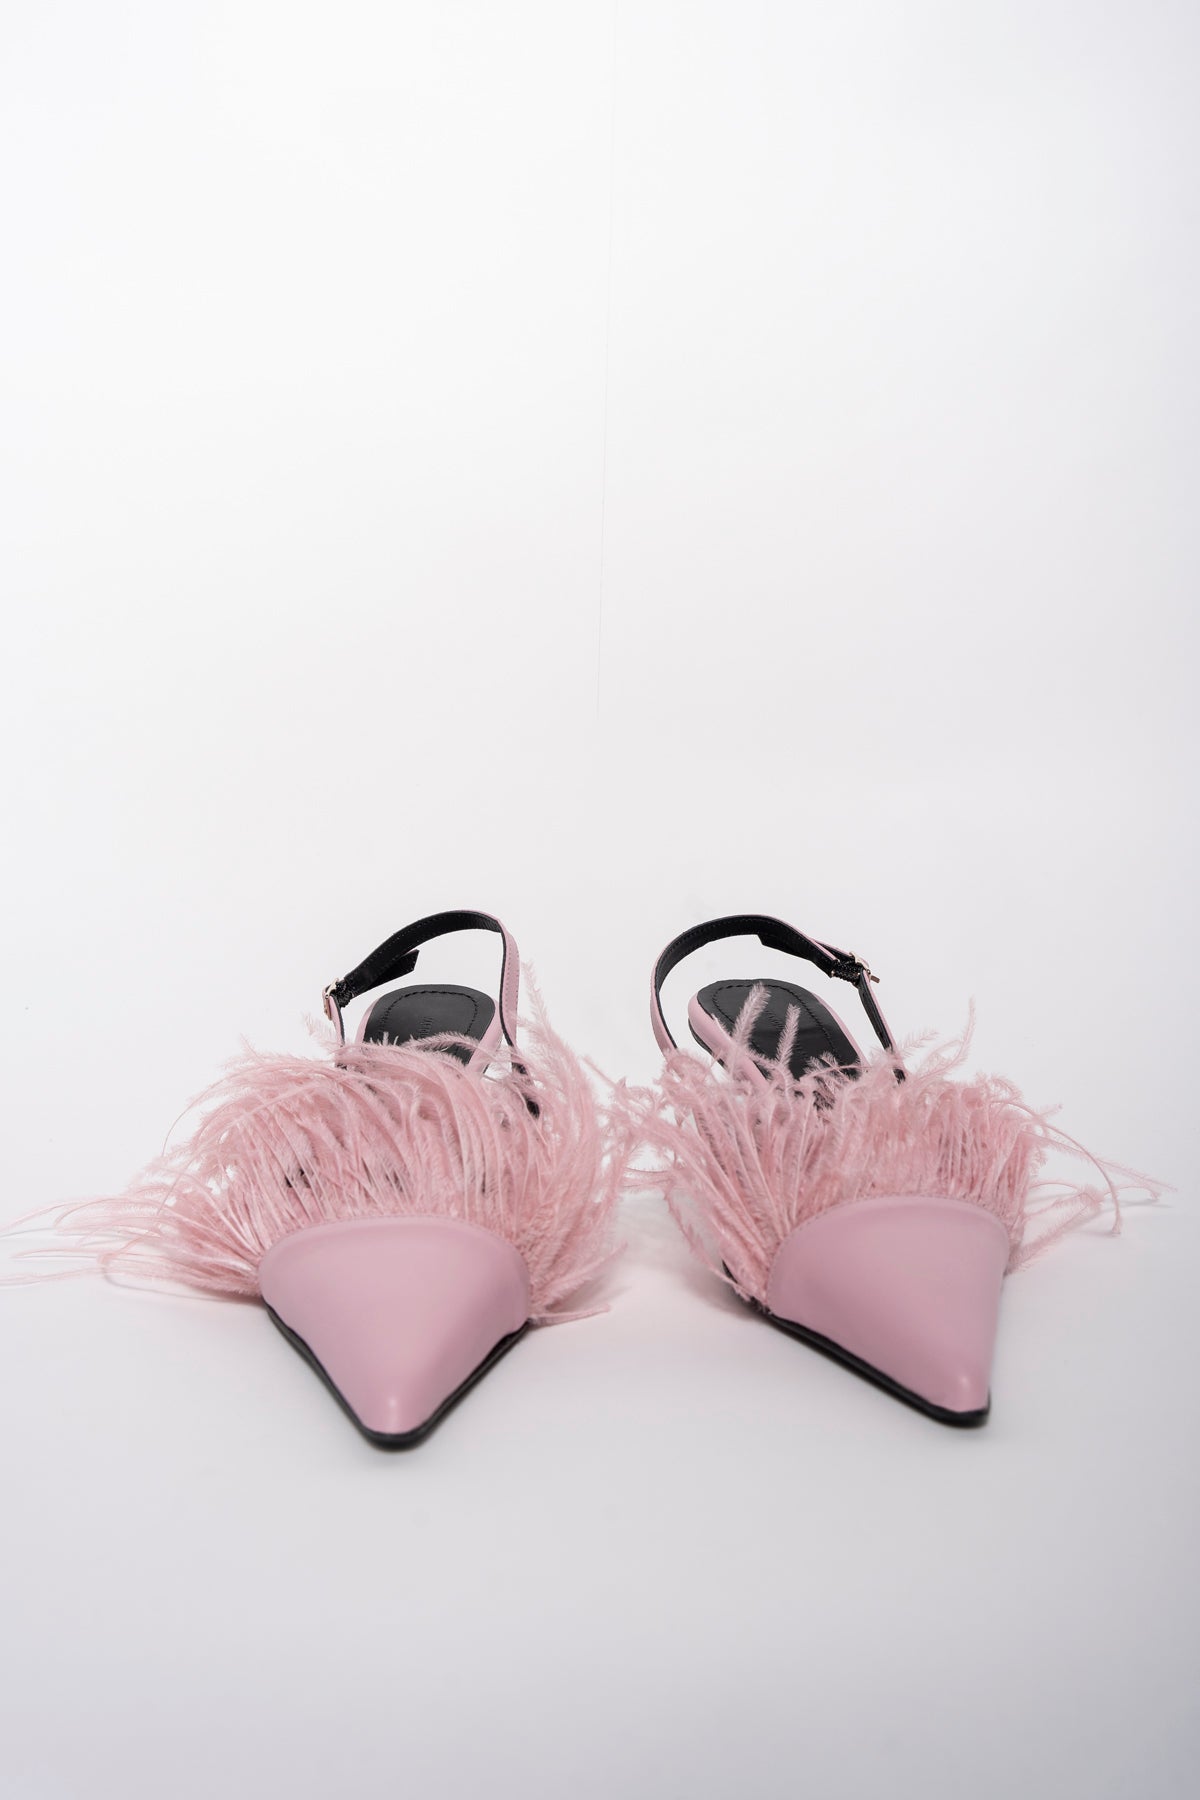 BABY PINK FEATHER PUMPS marques almeida